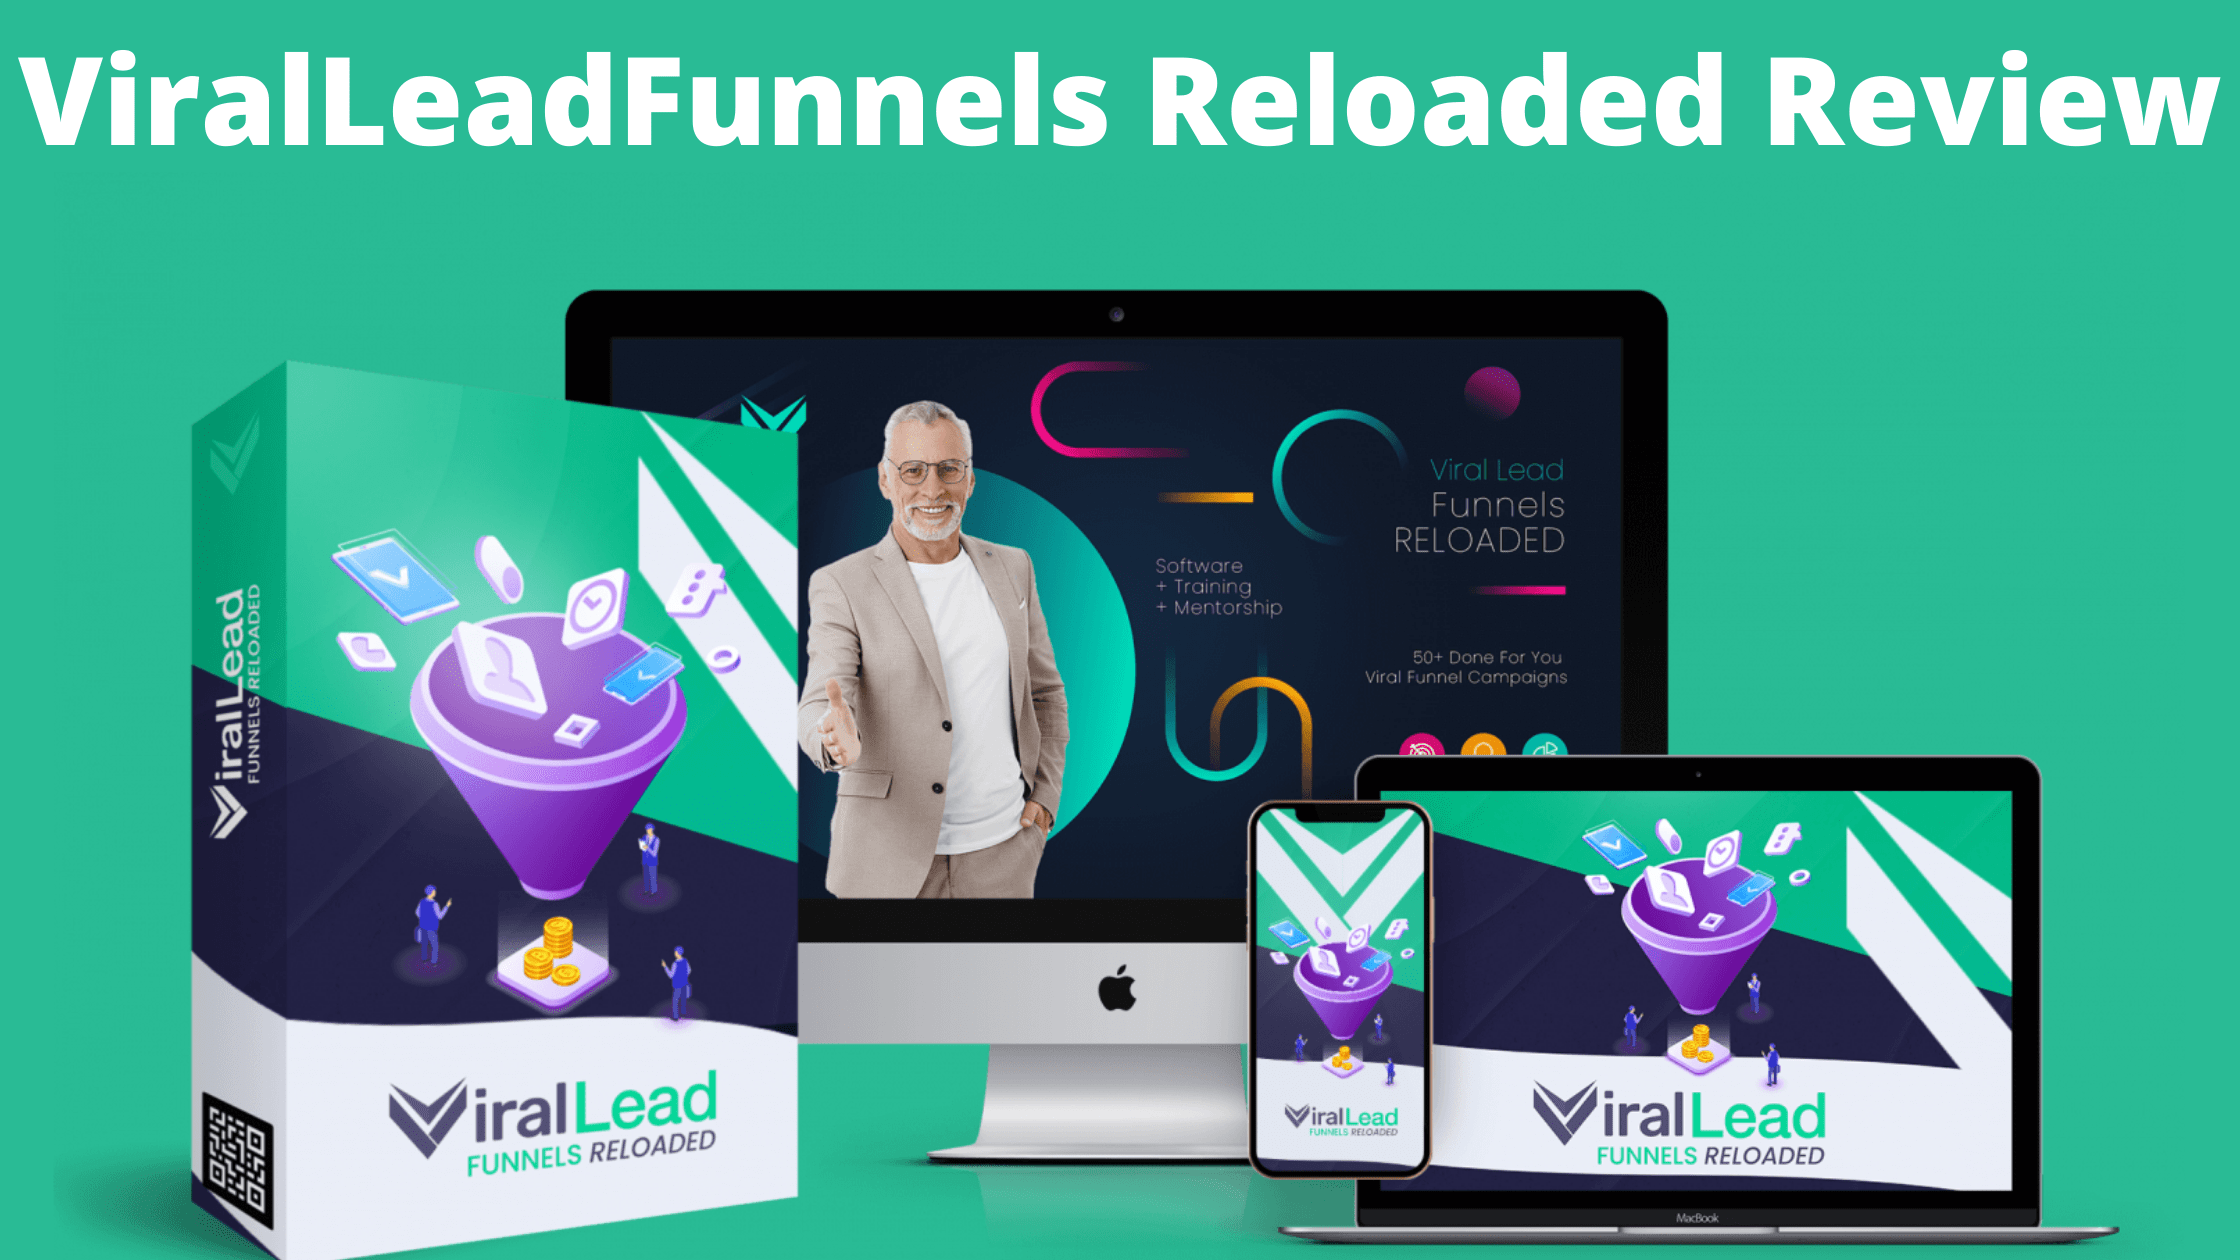 ViralLeadFunnels Reloaded Review